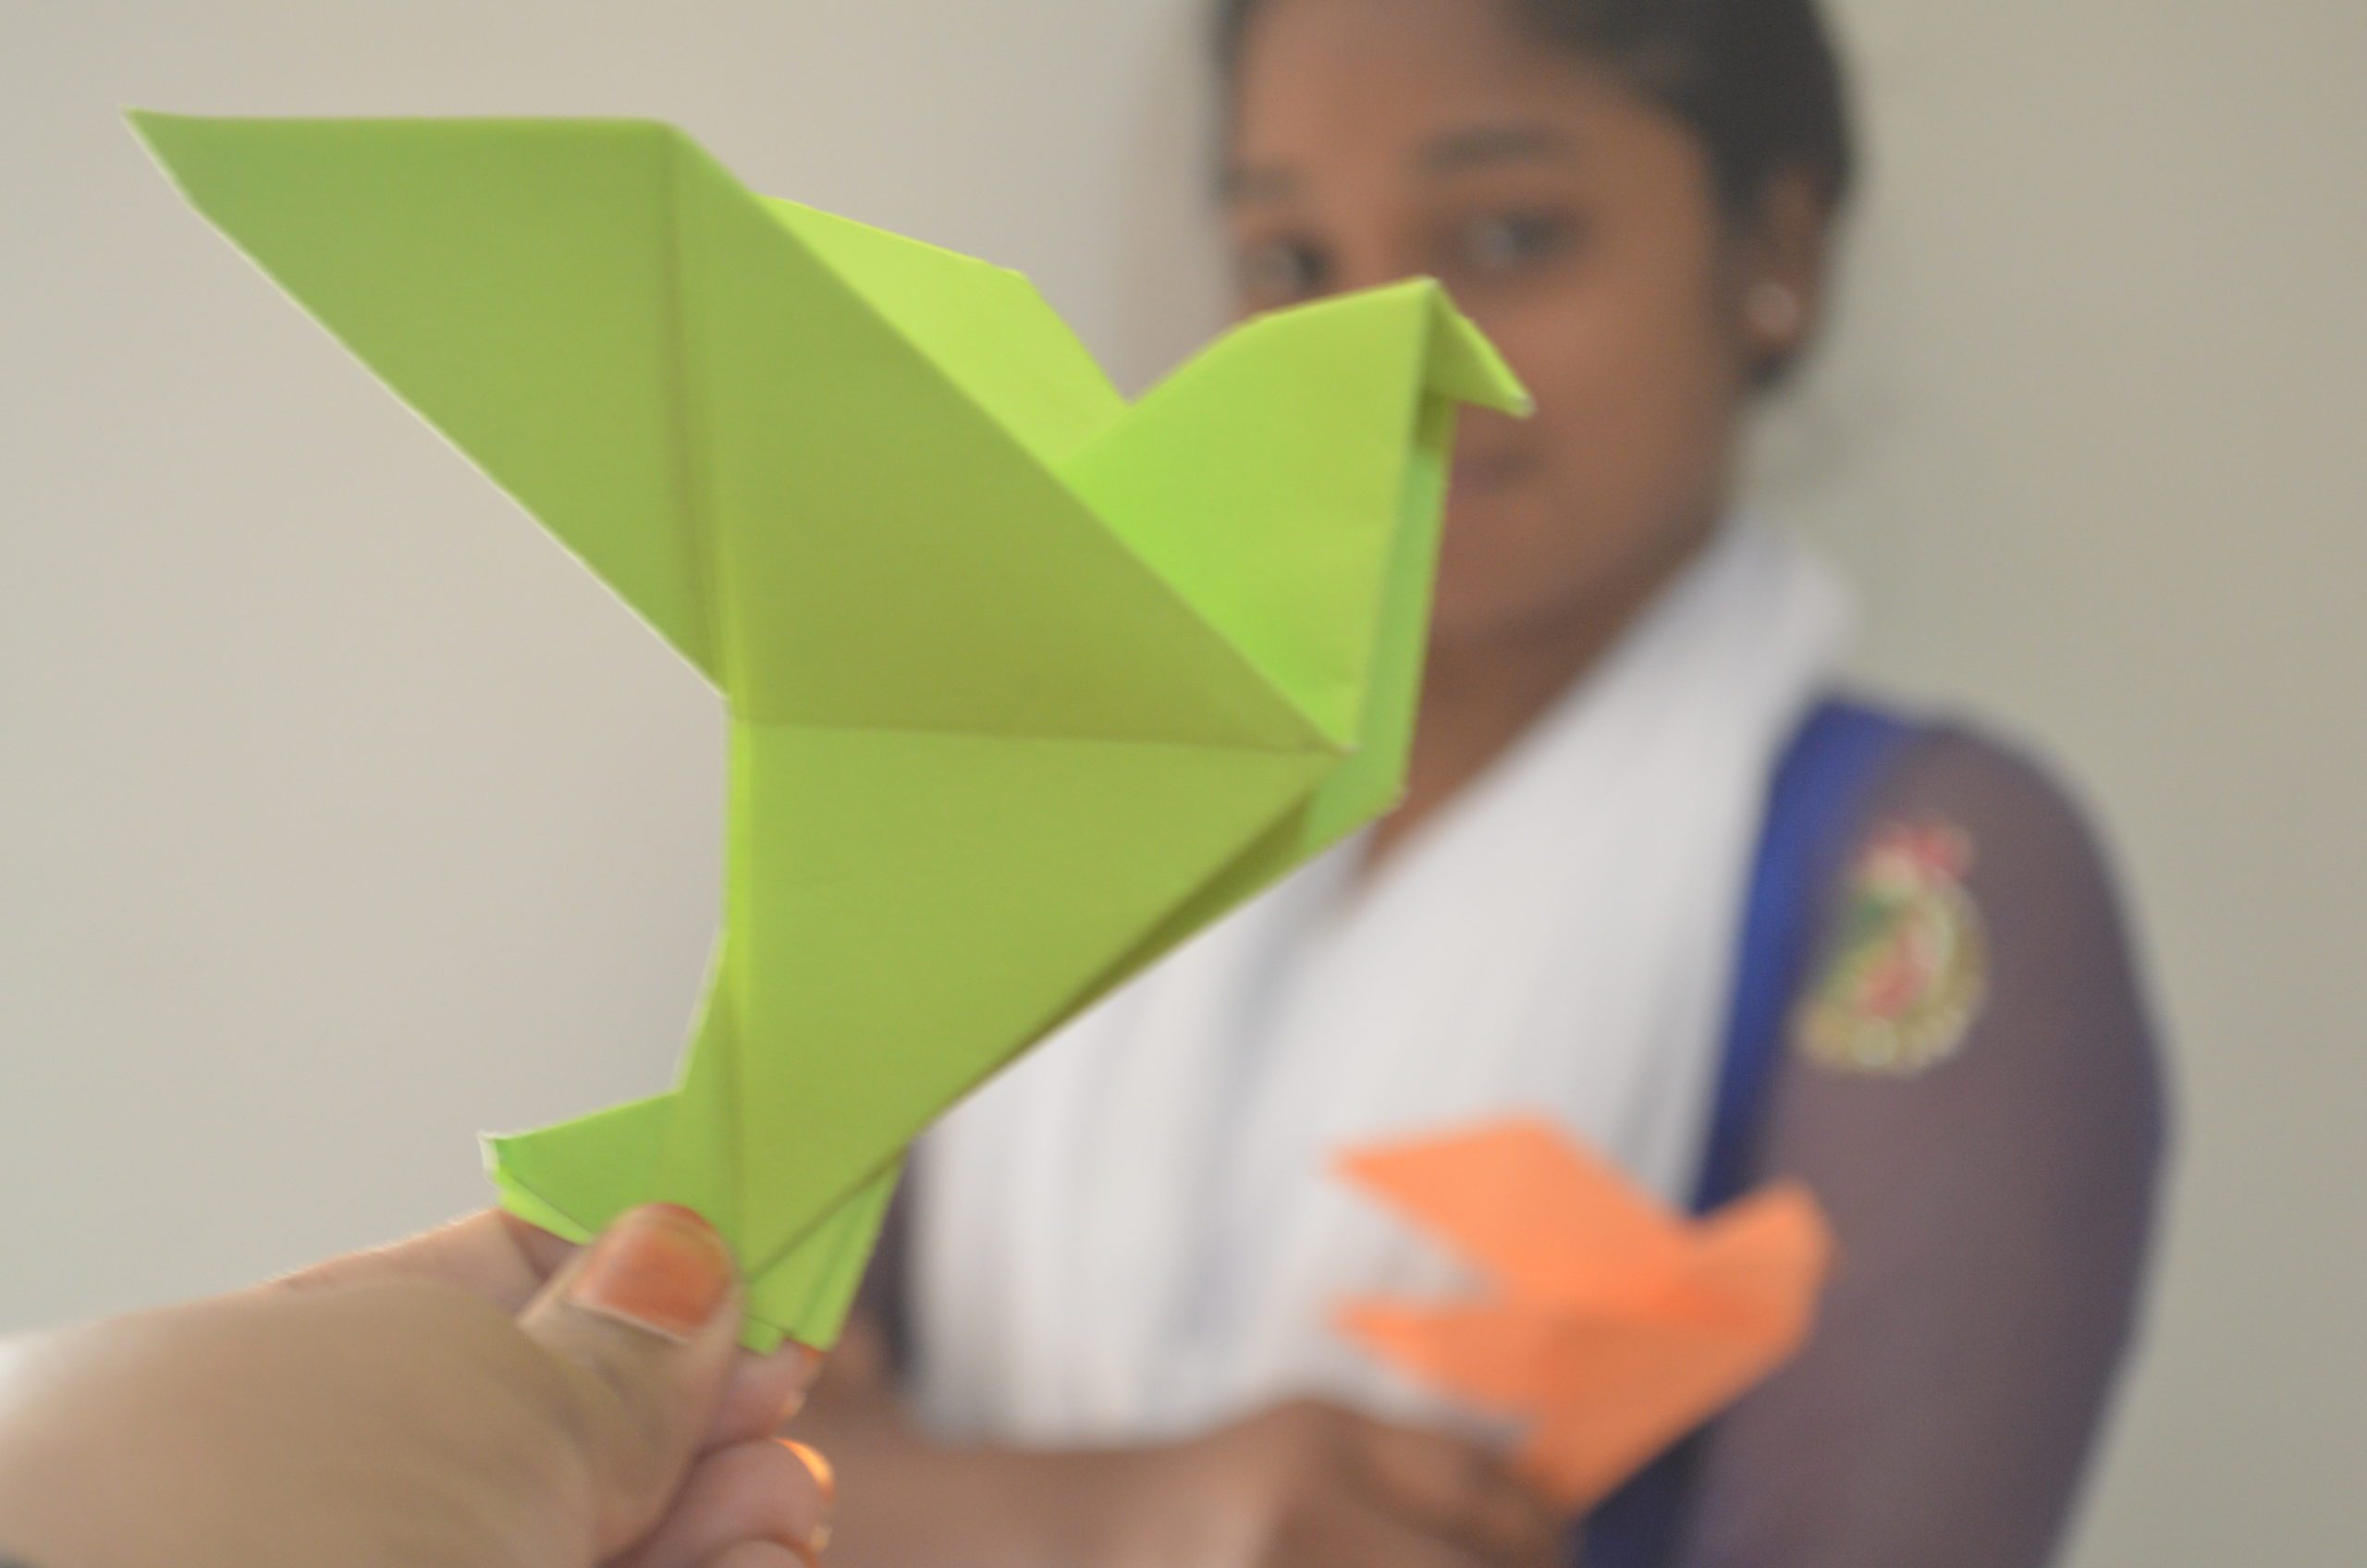 Paper birds made by child participants